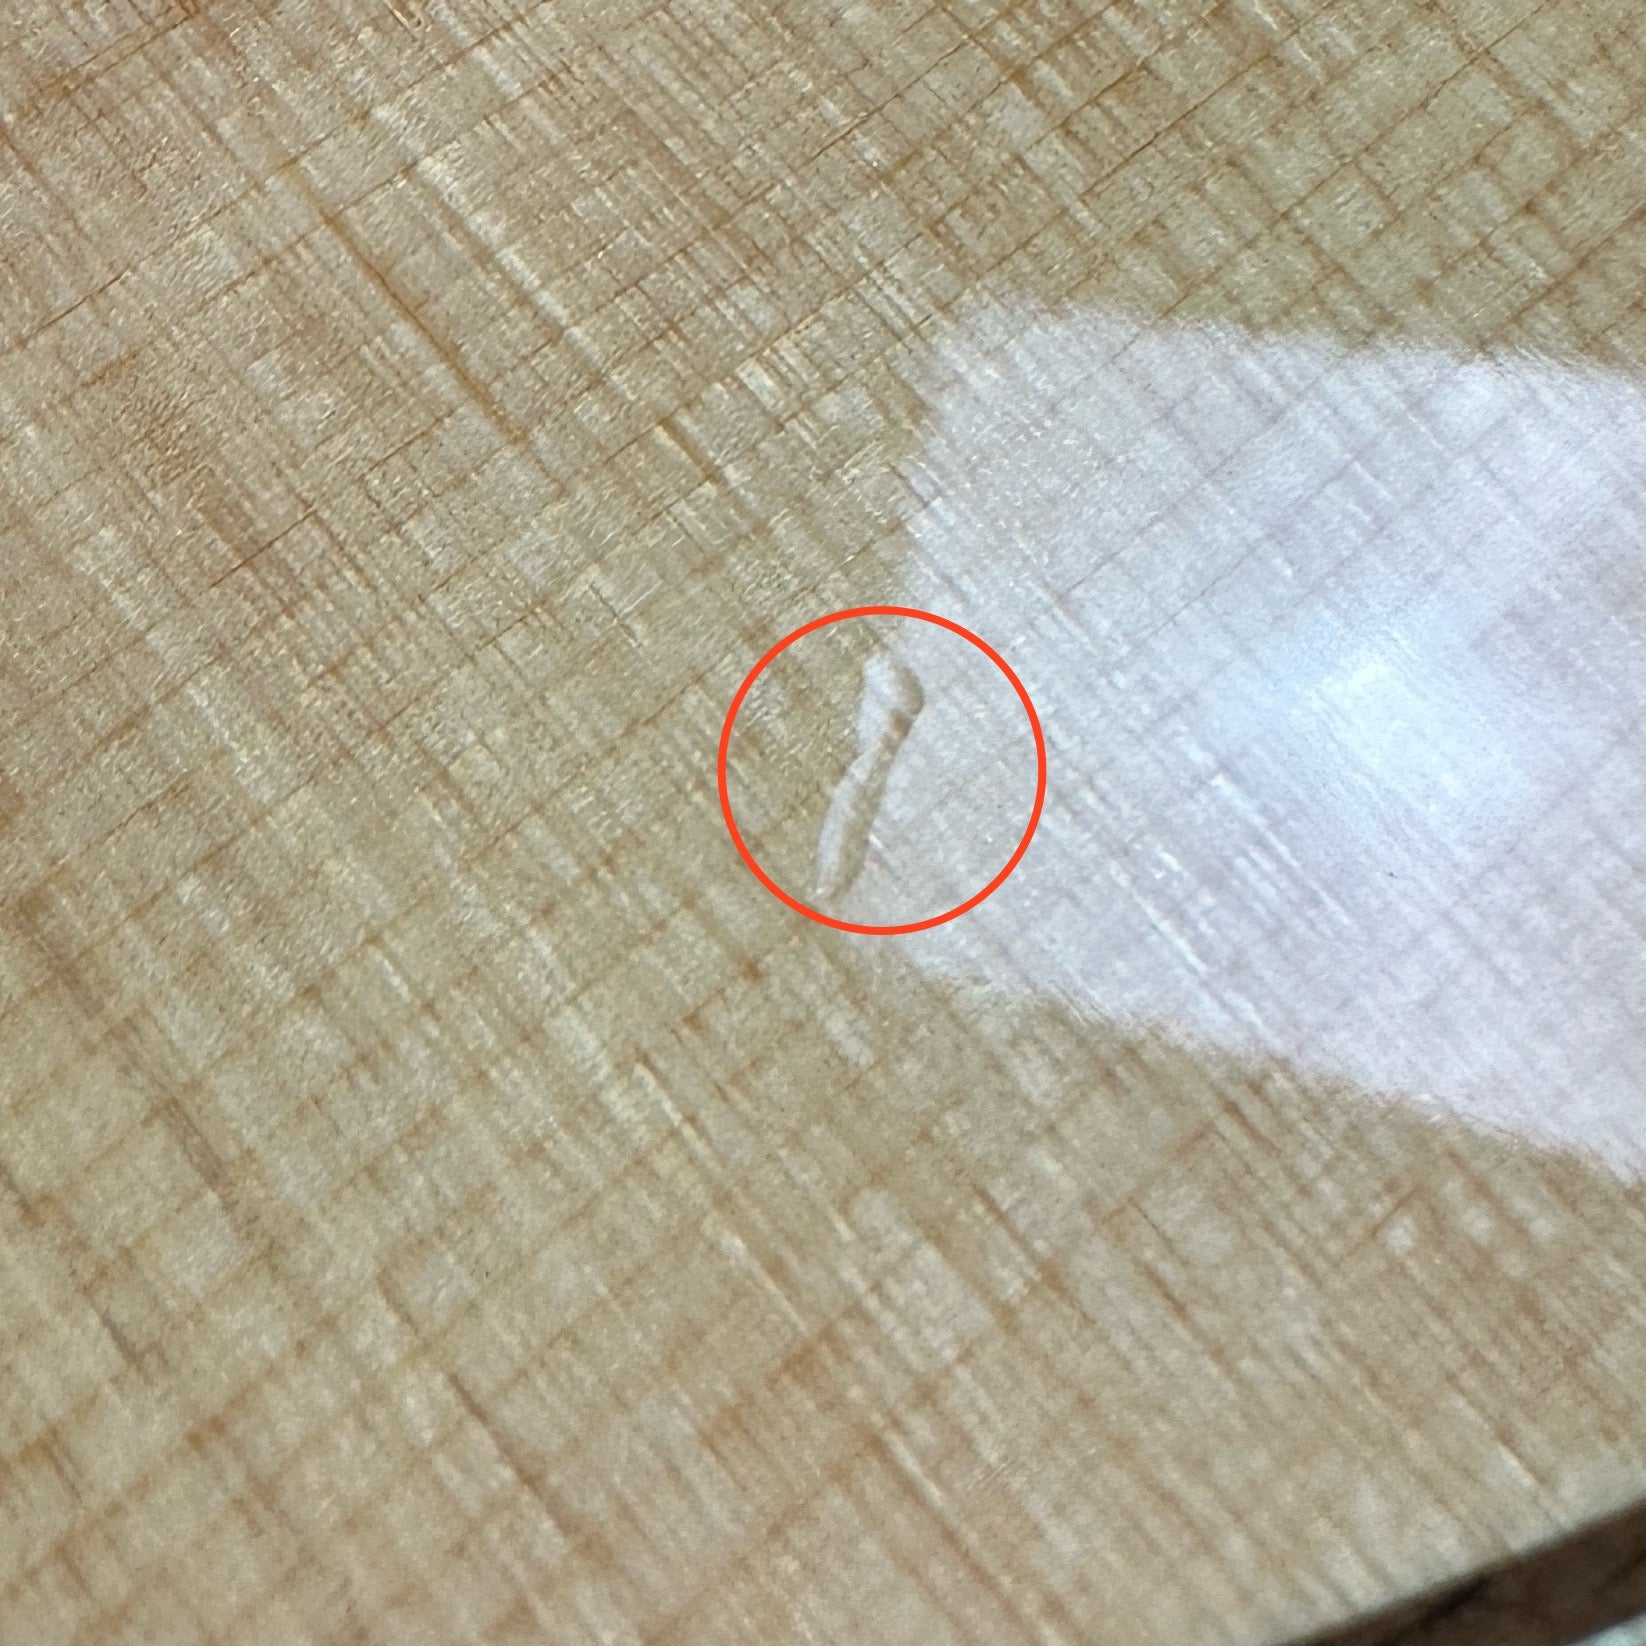 Dent on front of body of Used 2019 Taylor 814ce Natural.